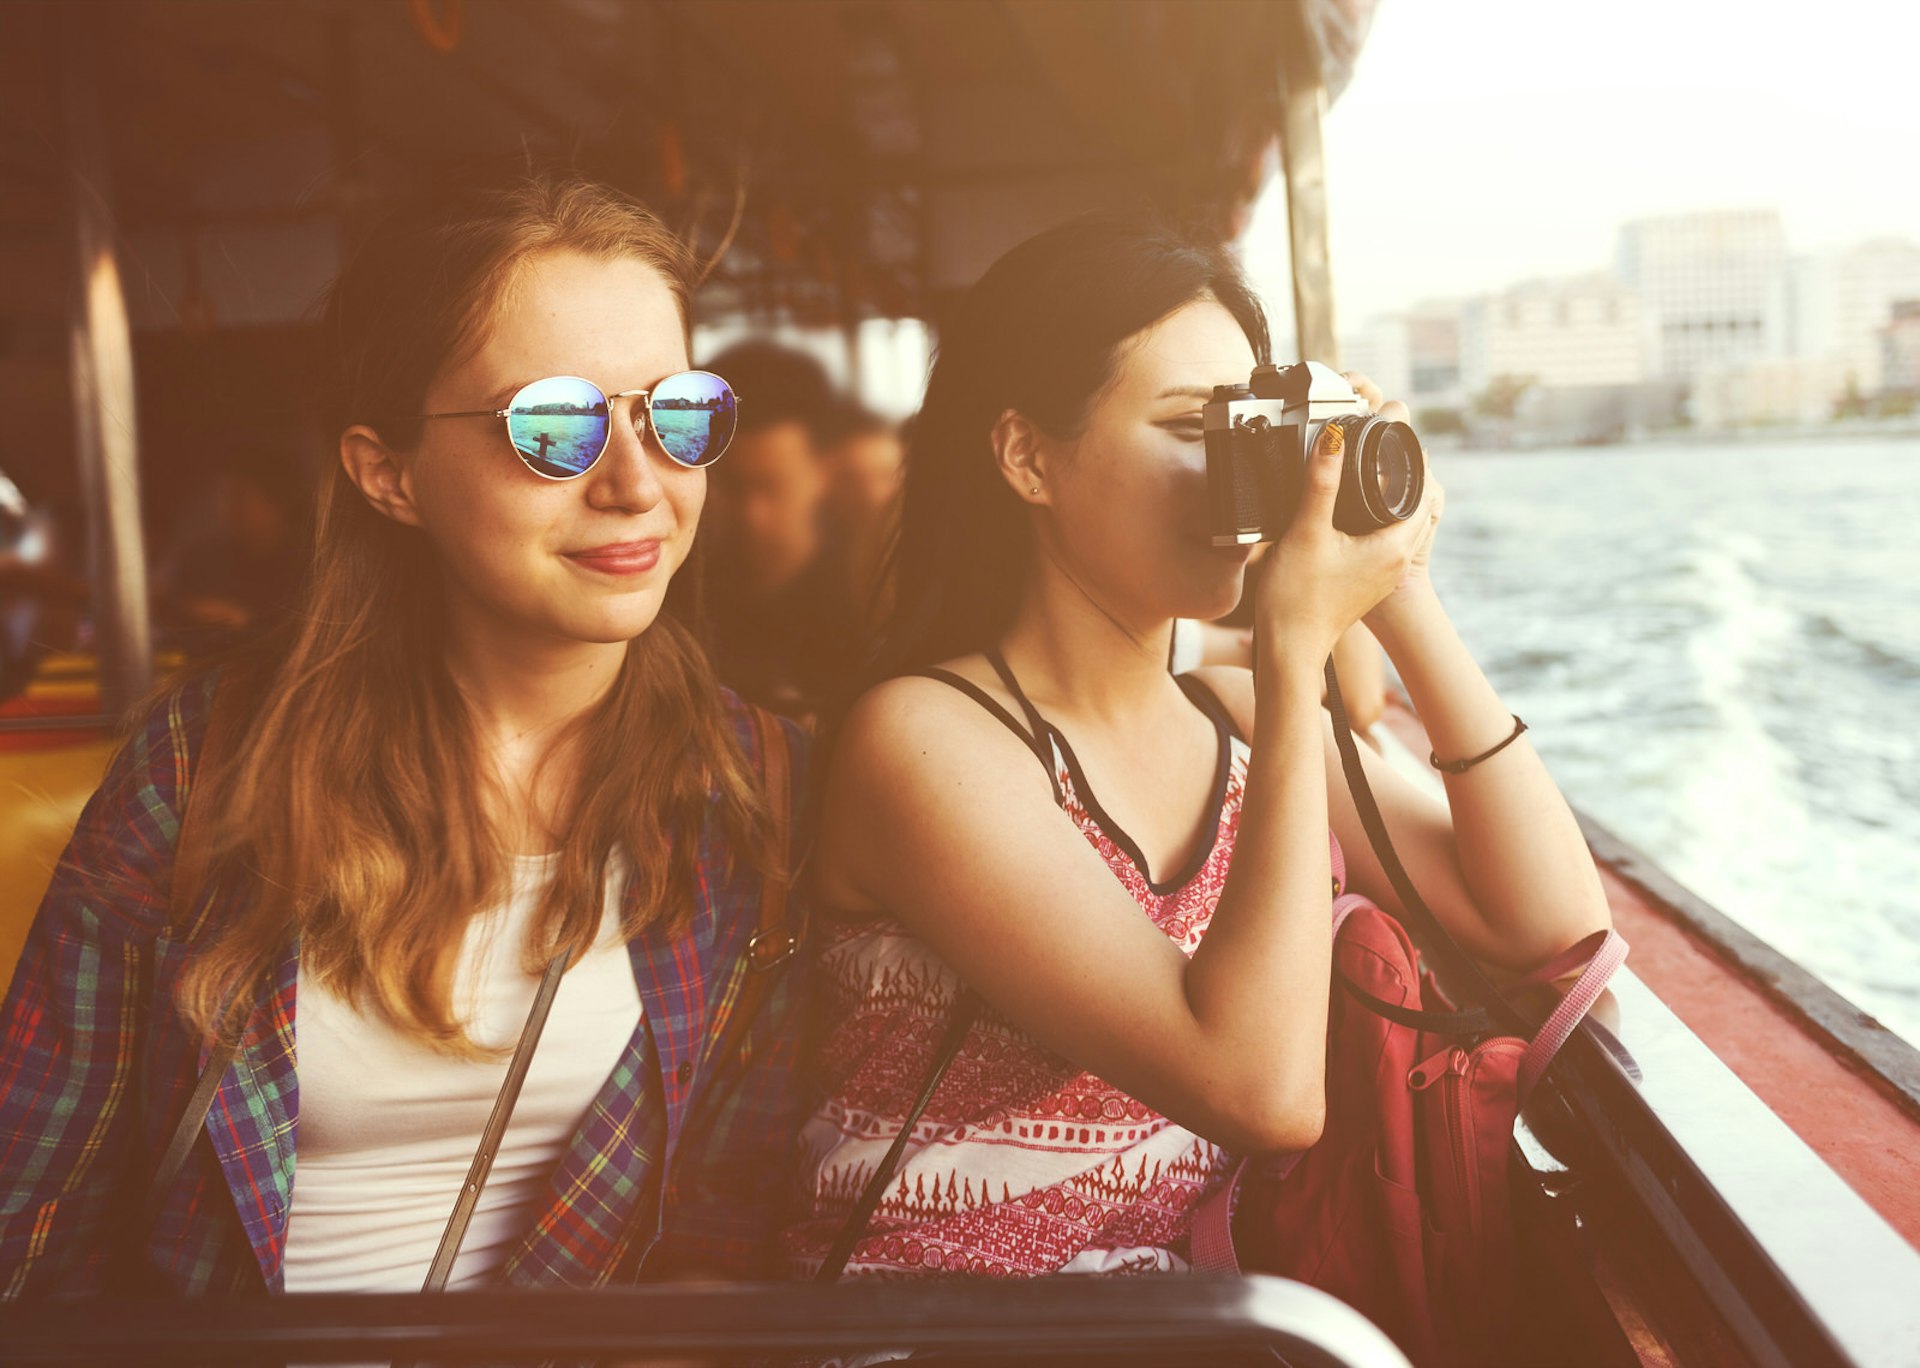 Two women sit together on a boat, looking out over the water. One is wearing sunglasses while the other looks through an SLR camera, pointing off the boat; travel and grief.